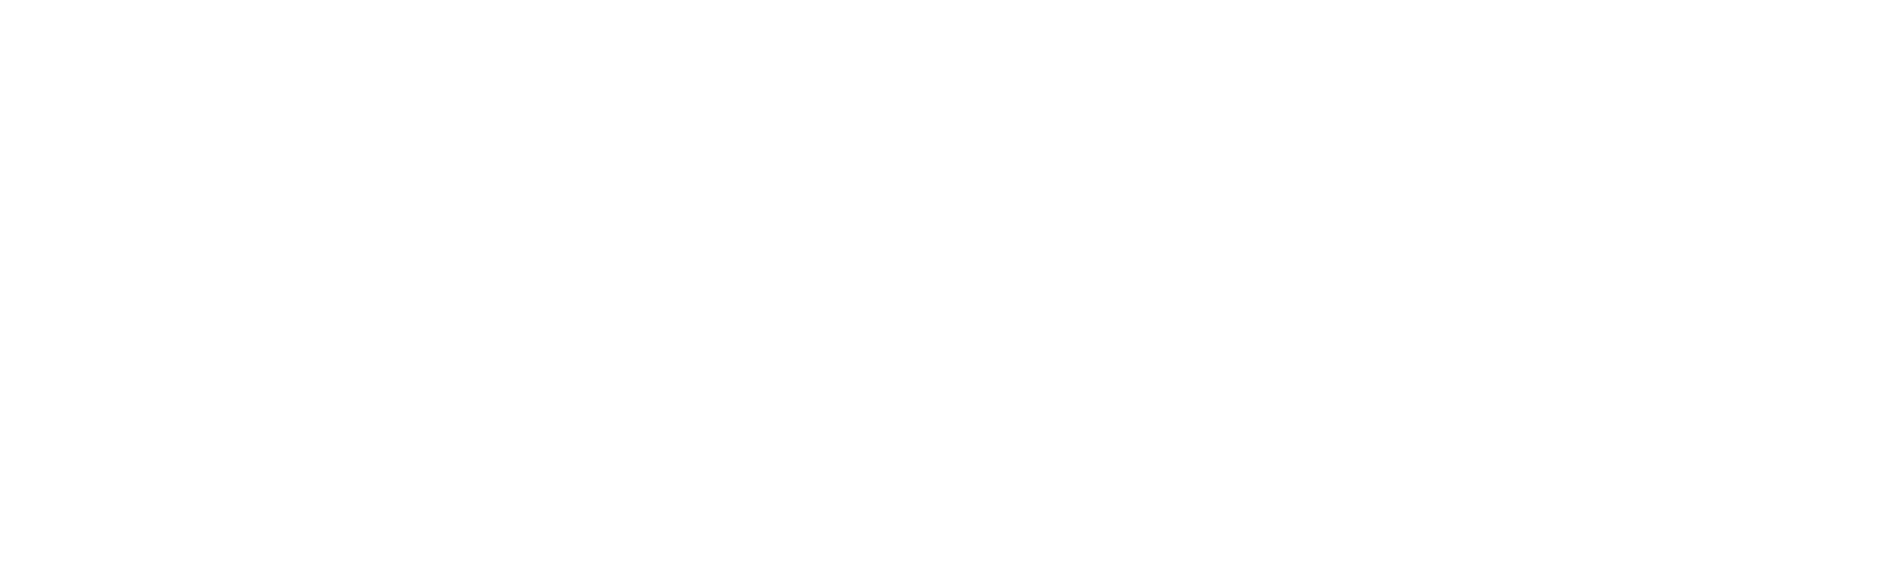 SKS_GROUP_white_png.png